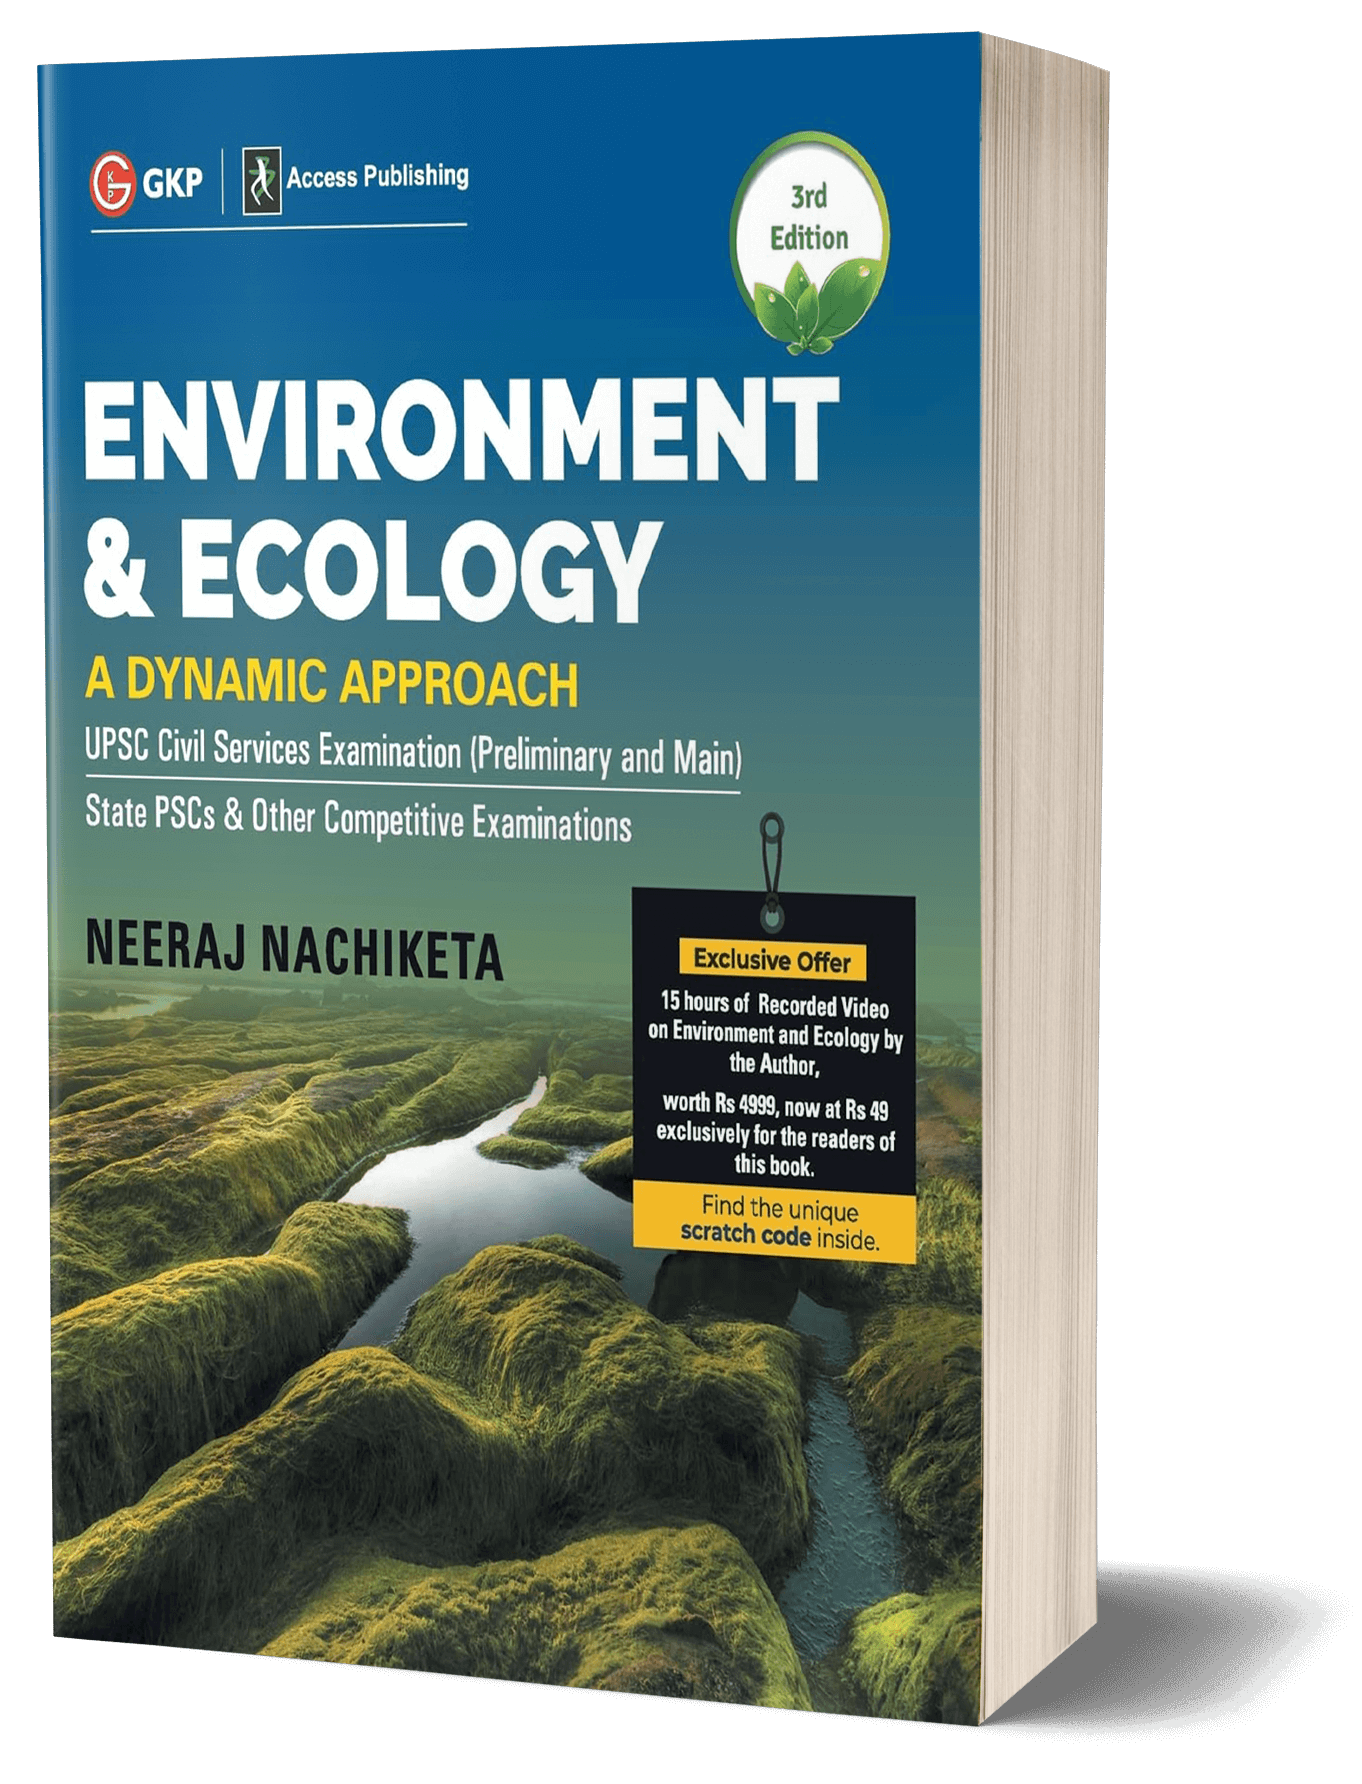 GK　A　3rd　Environment　Buy　Neeraj　Nachiketa　By　And　Ecology:　Edition　Dynamic　Approach,　Publications